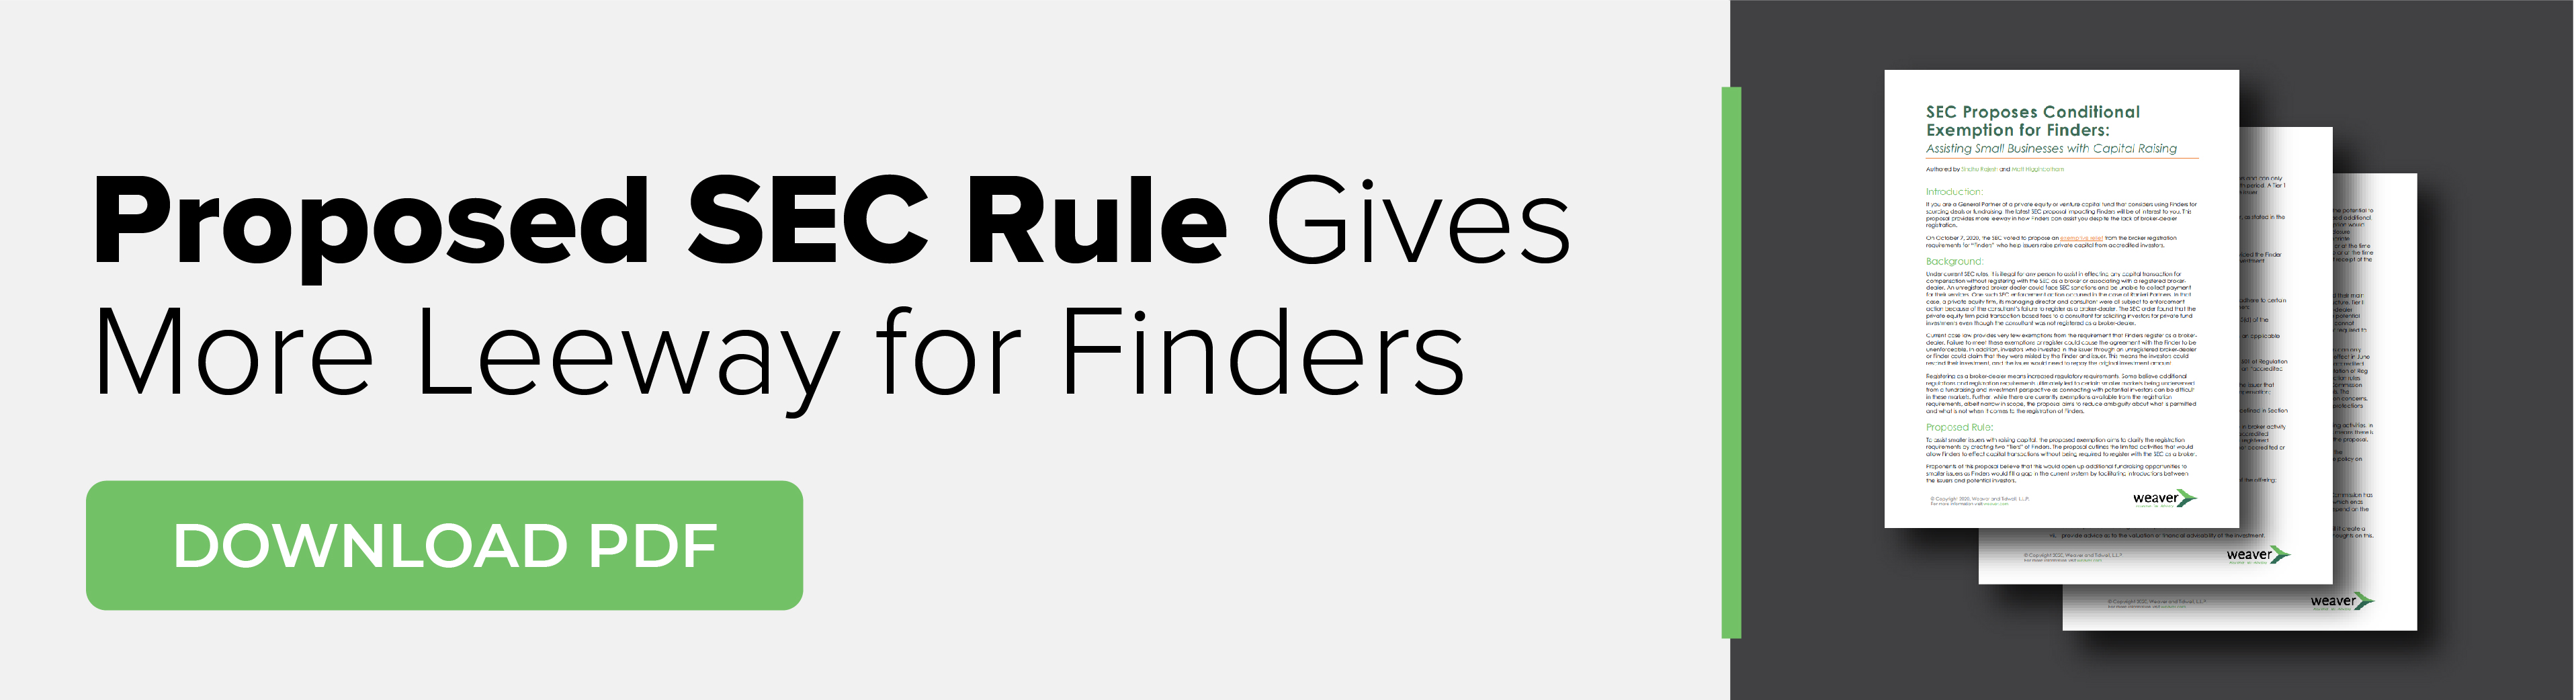 Proposed SEC Rules Gives More Leeway for Finders - Download PDF